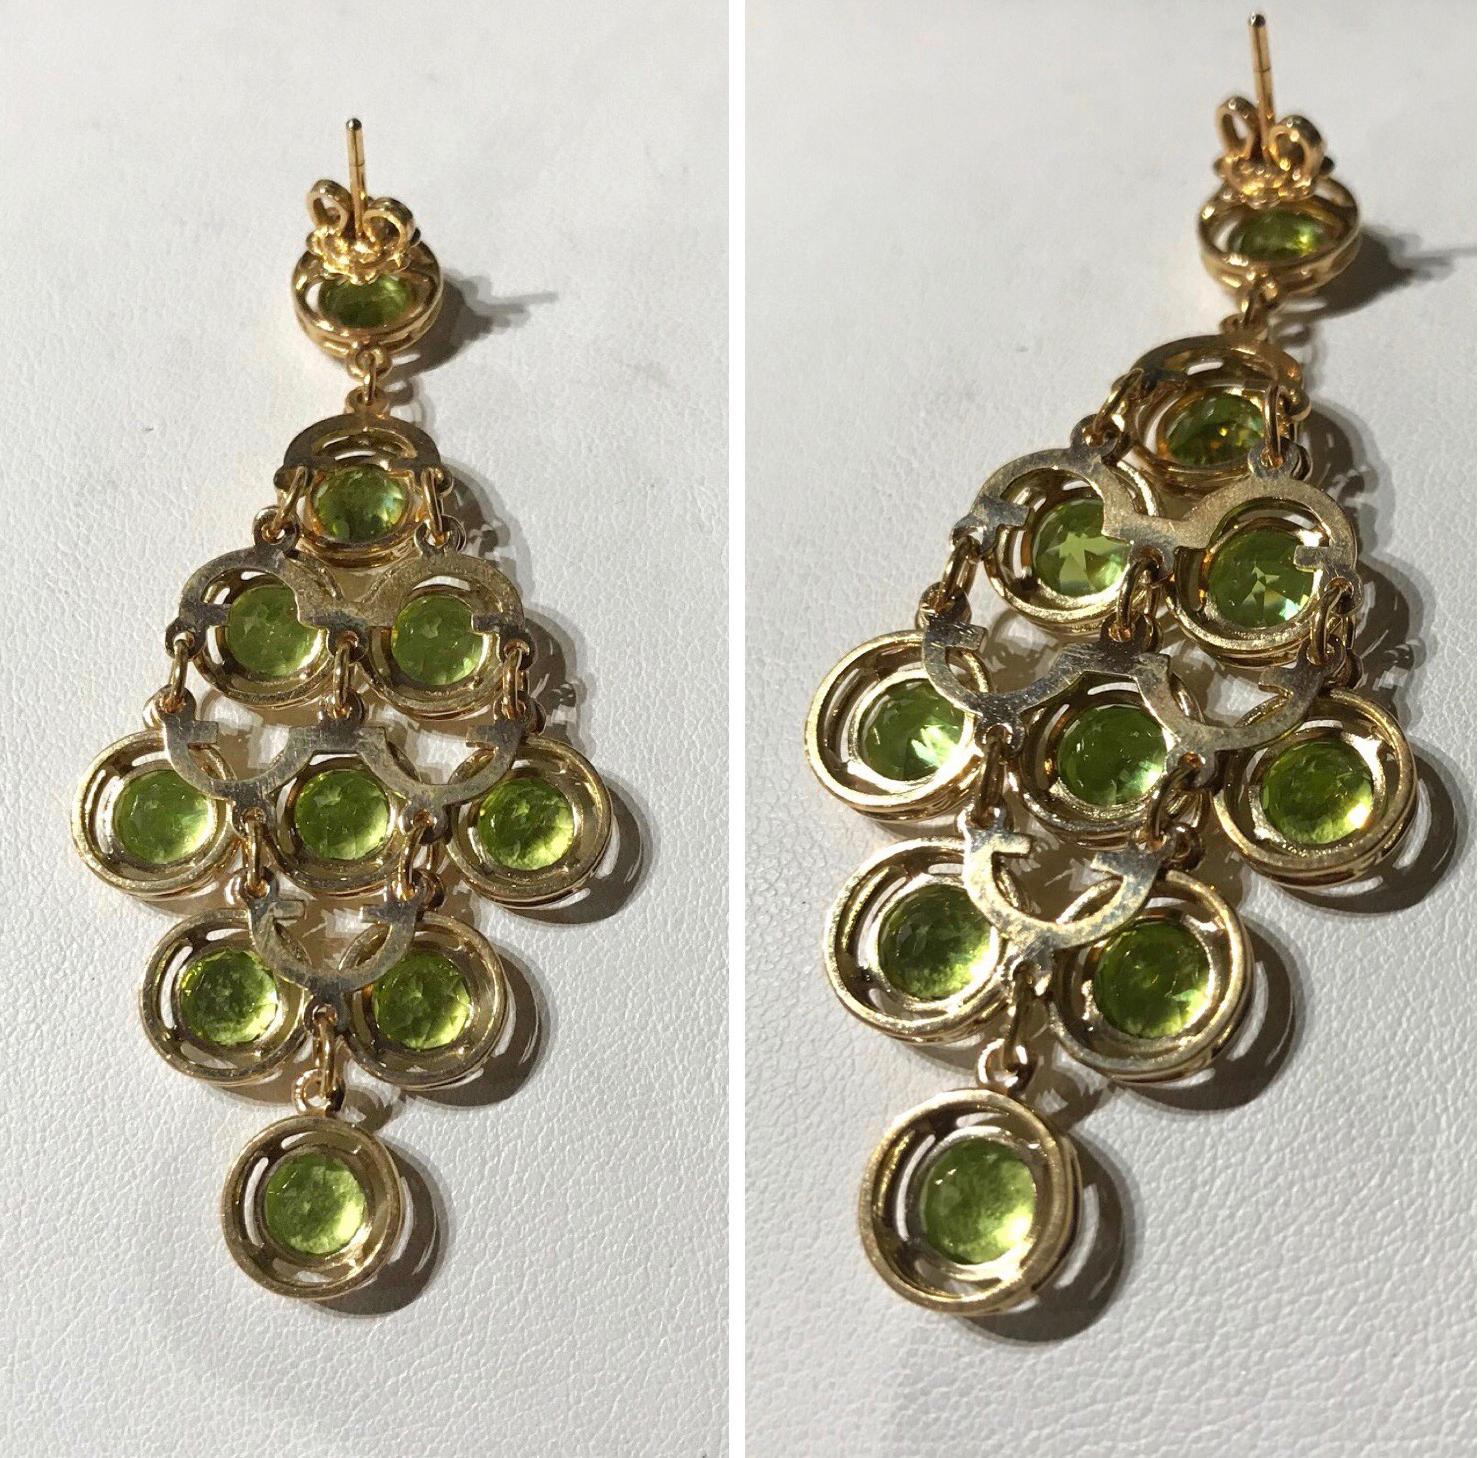 21.5 Carat Peridot Chandelier Gold Statement Drop Earrings Estate Fine Jewelry In Excellent Condition For Sale In Montreal, QC